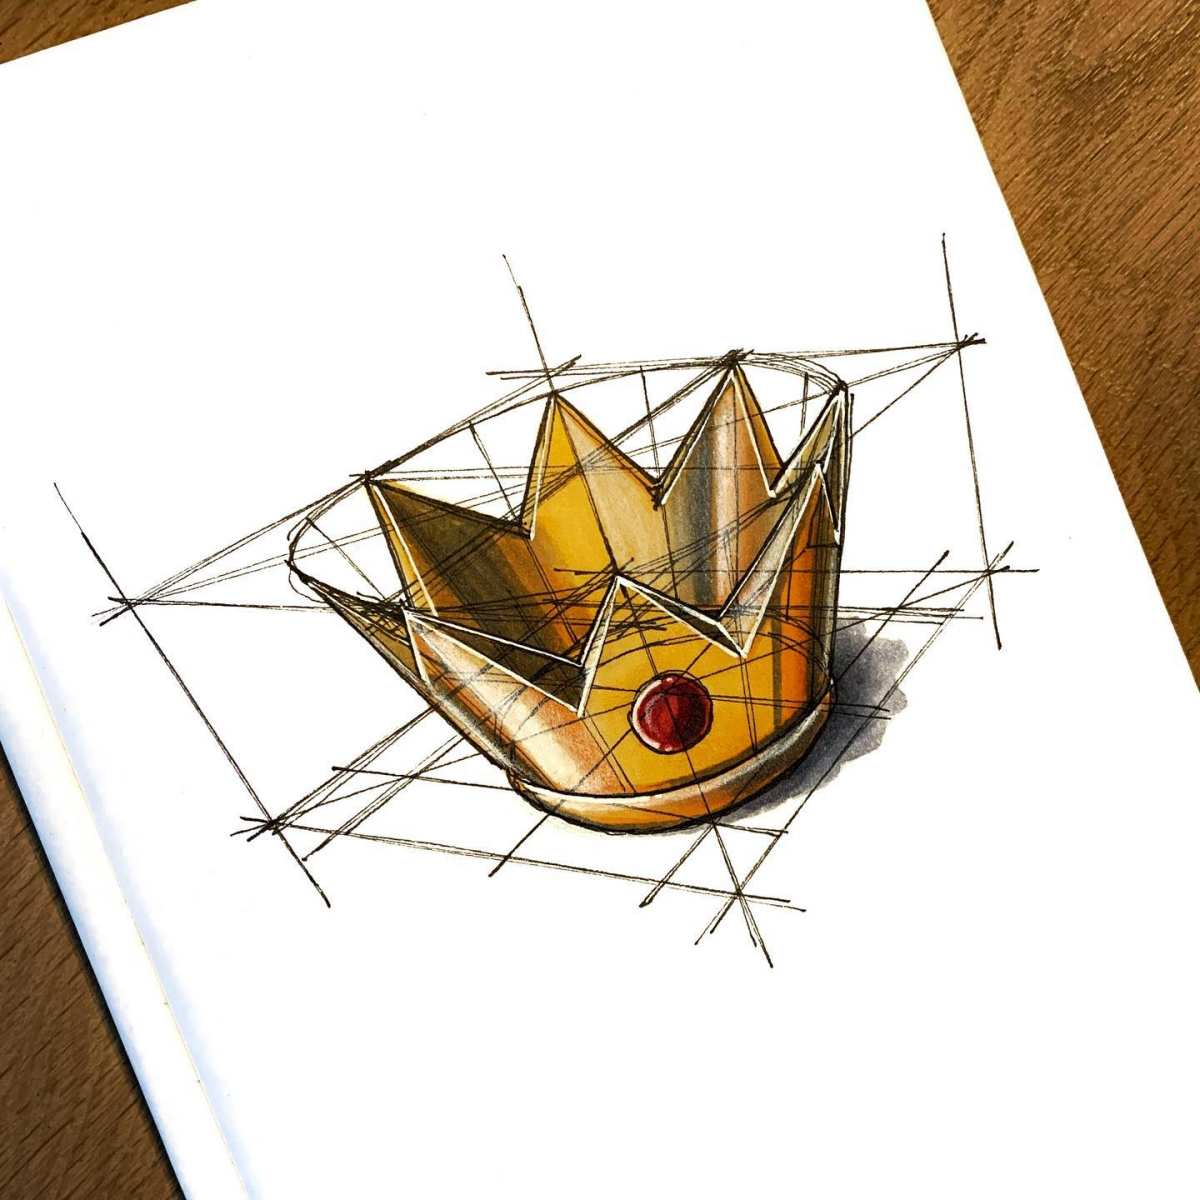 How To Draw A Crown: 2 Easy Tutorials + 10 Crown Drawing Ideas